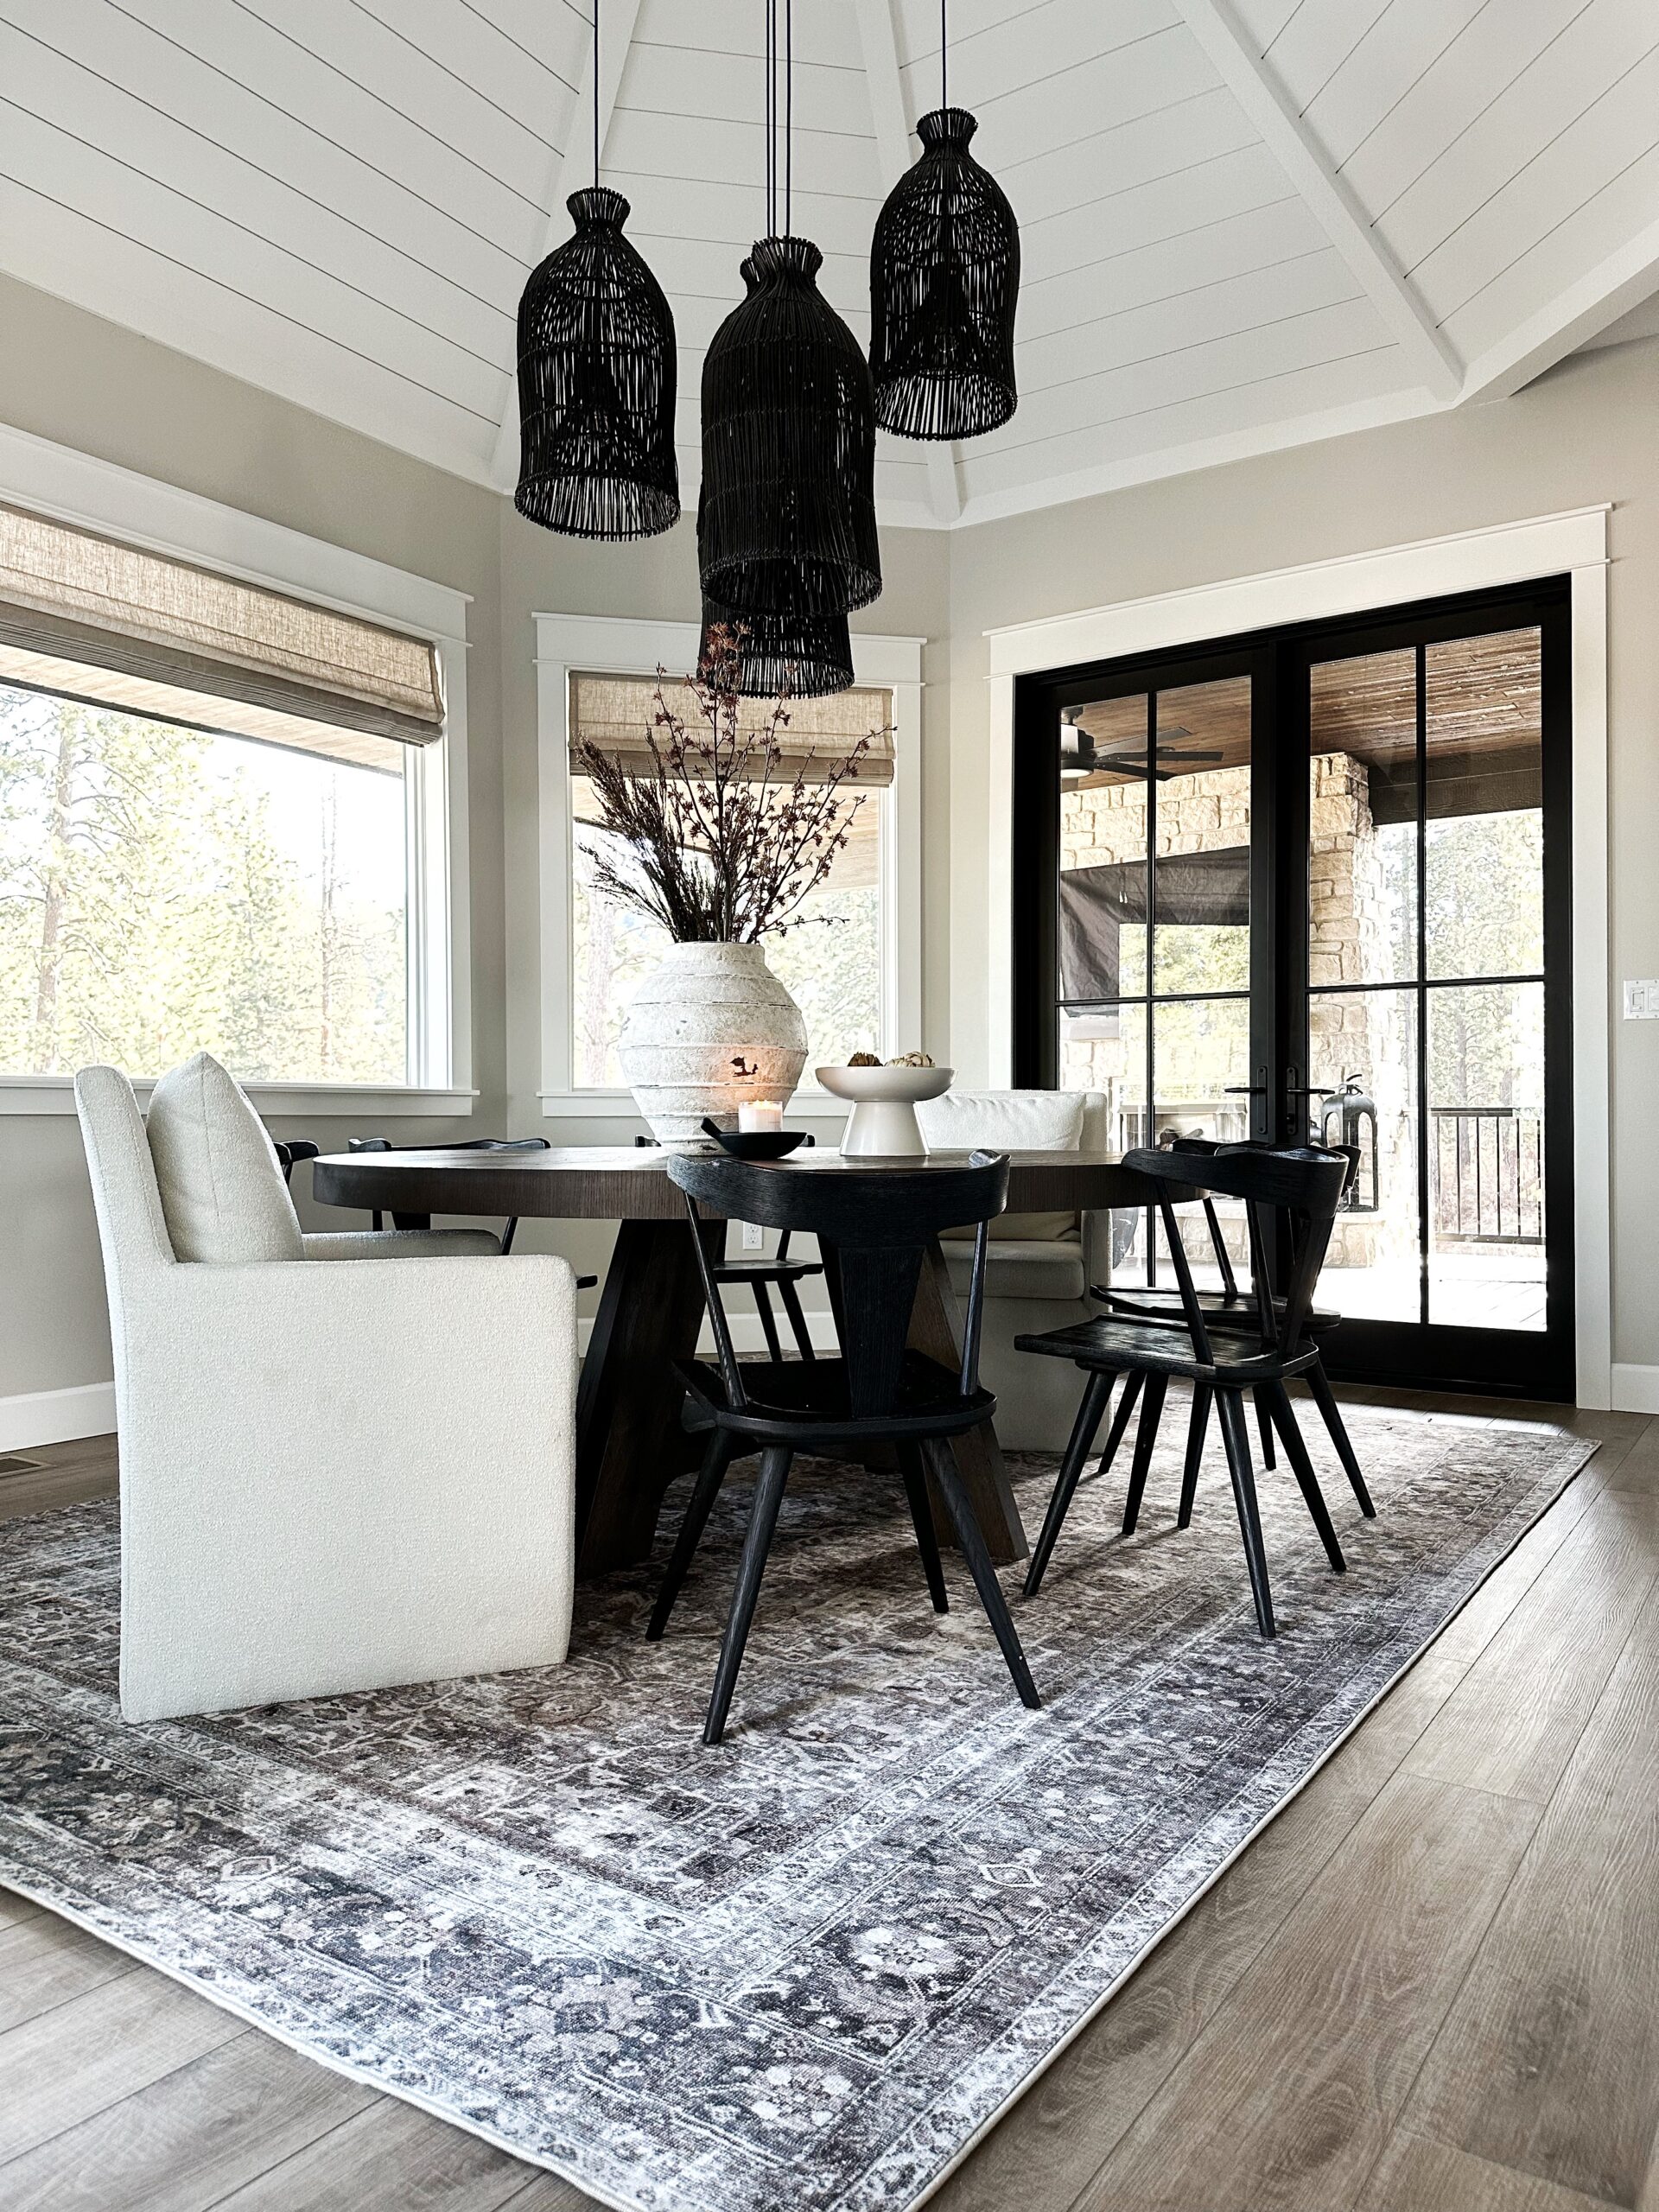 kitchen nook, dining refresh, modern rustic home, area rug, dining chairs, terracotta vase, hanging lights, home refresh, dining refresh 